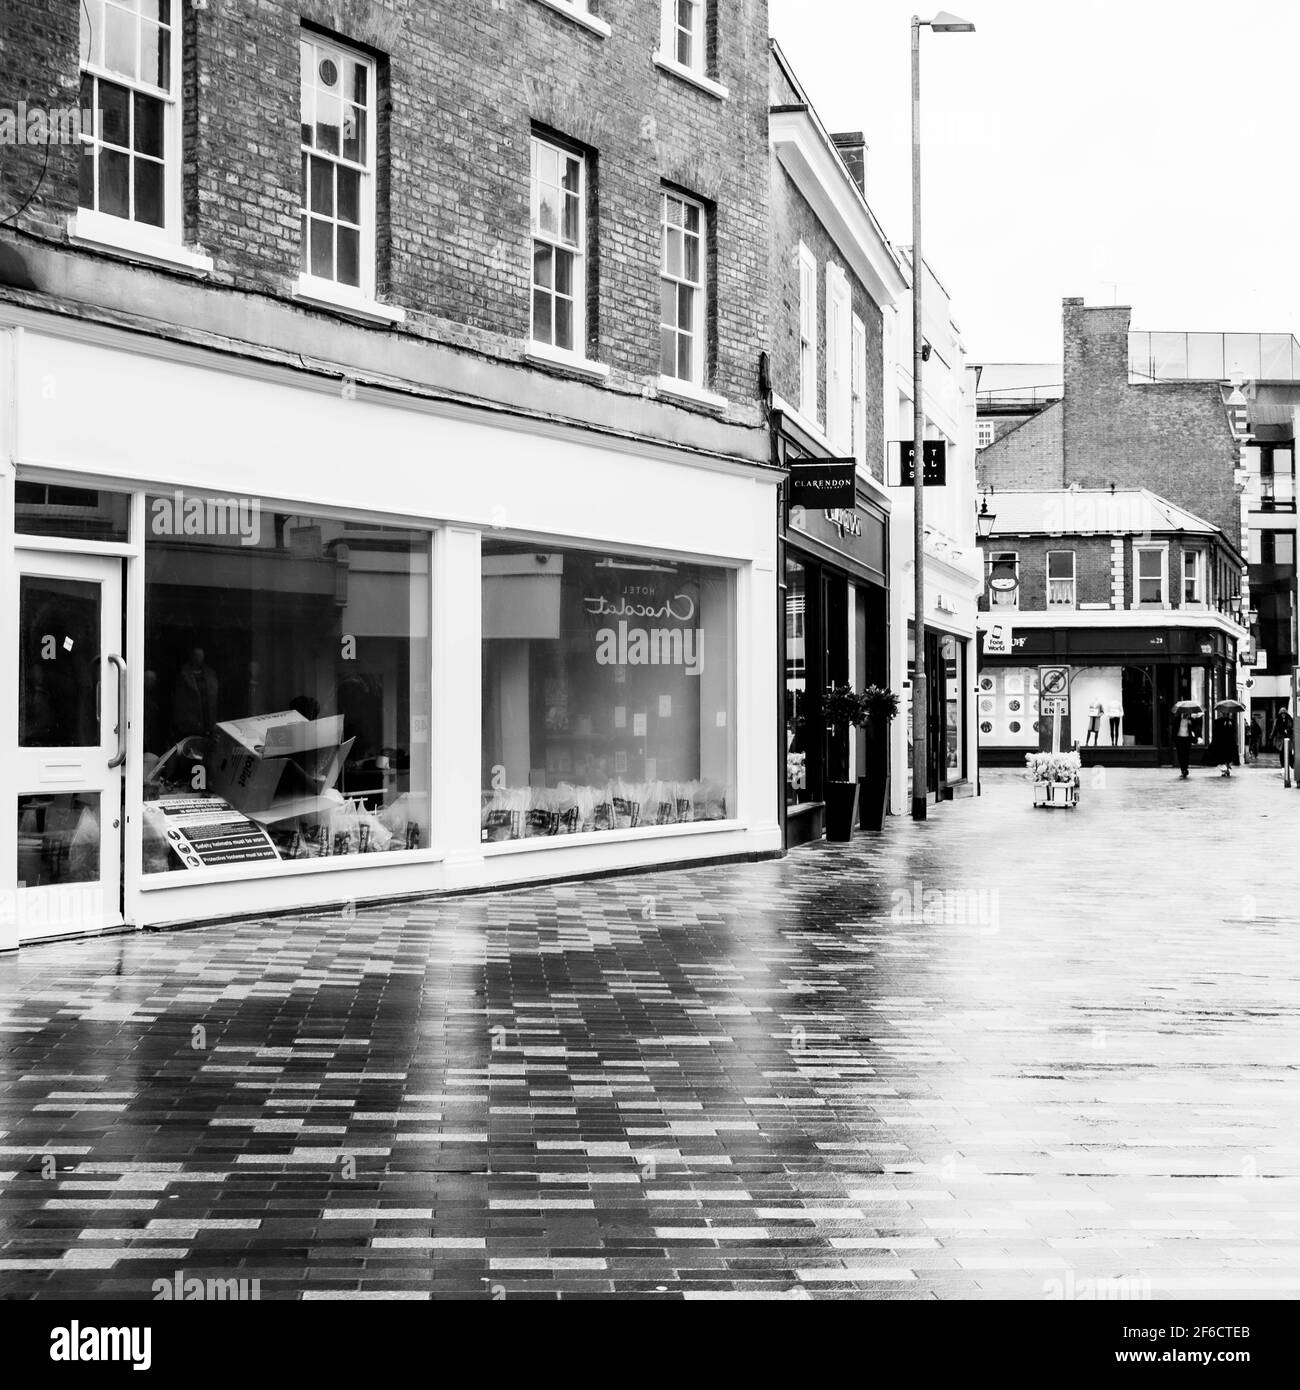 Black And White Image Of An Empty High Street Store CLosed Down During covid-19 Coronavirus Pandemic Lockdown Stock Photo